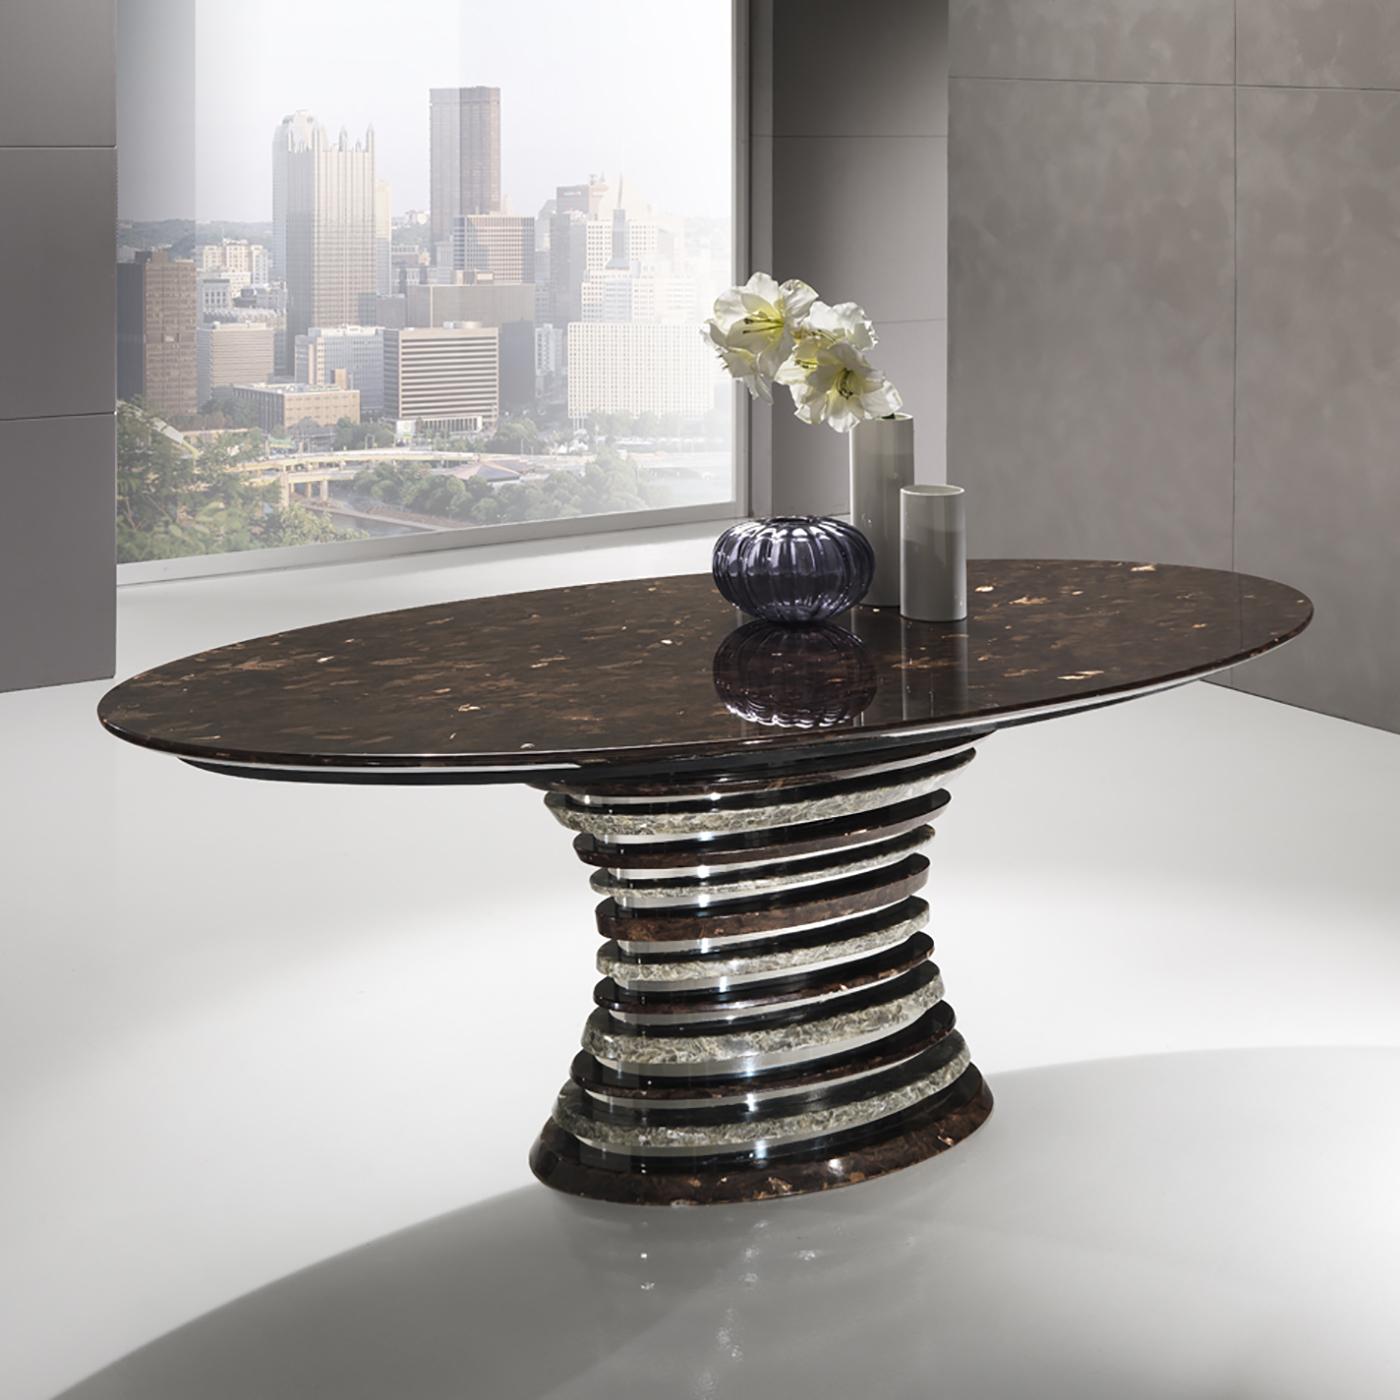 Part of the signature Auriga Collection, this astonishing dining table is handcrafted of Crystal Stone®, a crystalline alabaster found exclusively in Italy's Romagna region, which the Ballarini family has been quarrying and sculpting for